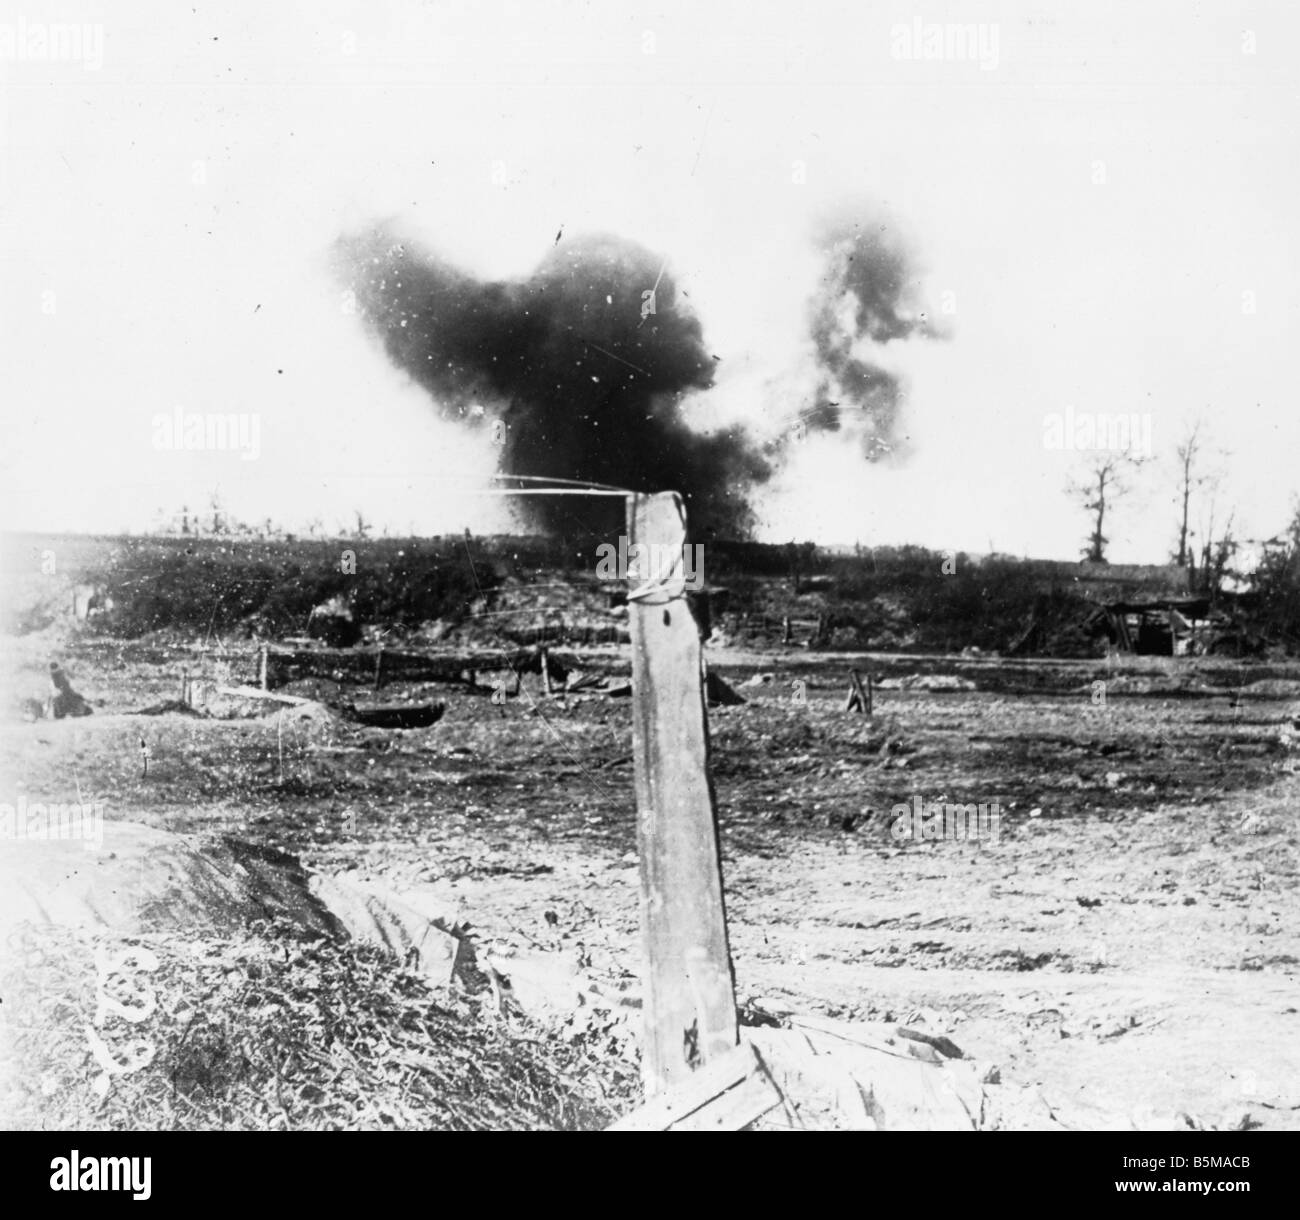 2 G55 W1 1916 5 Shell fire at Assevillers c 1916 History WWI Western Front Cloud after shell fire in the gorge of Assevillers No Stock Photo